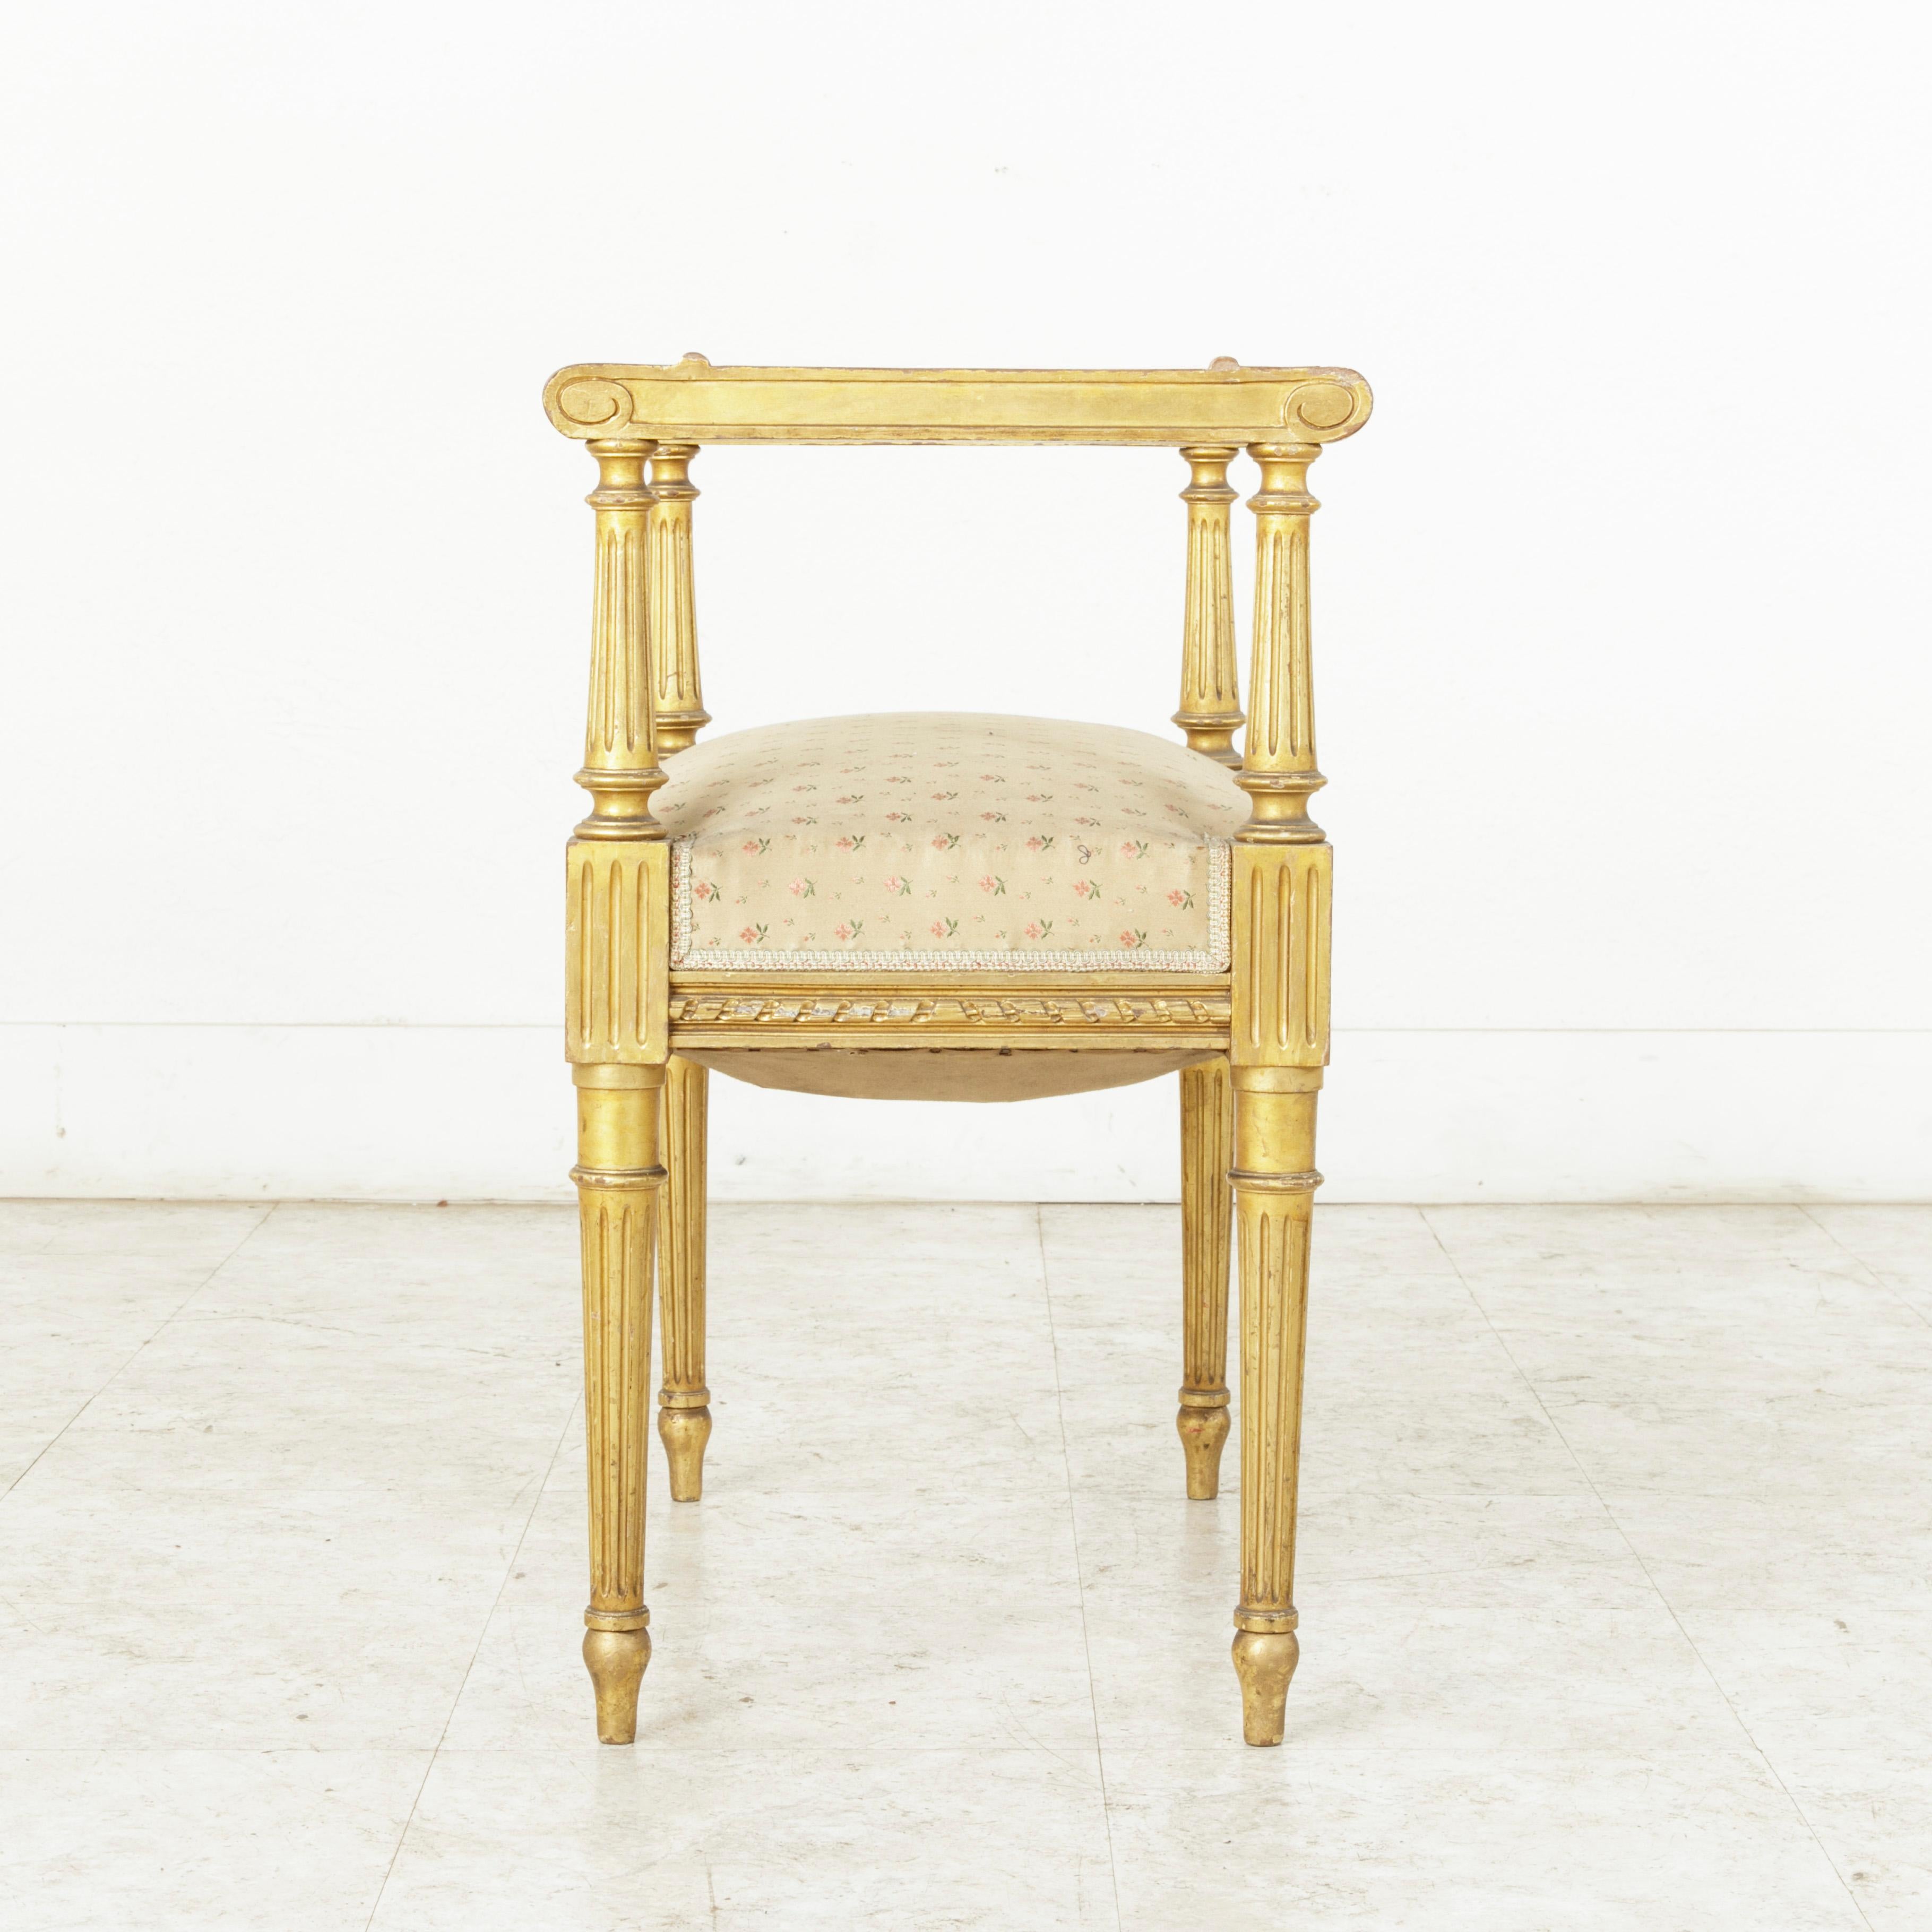 Early 20th Century French Louis XVI Style Giltwood Banquette Vanity Stool Bench 3